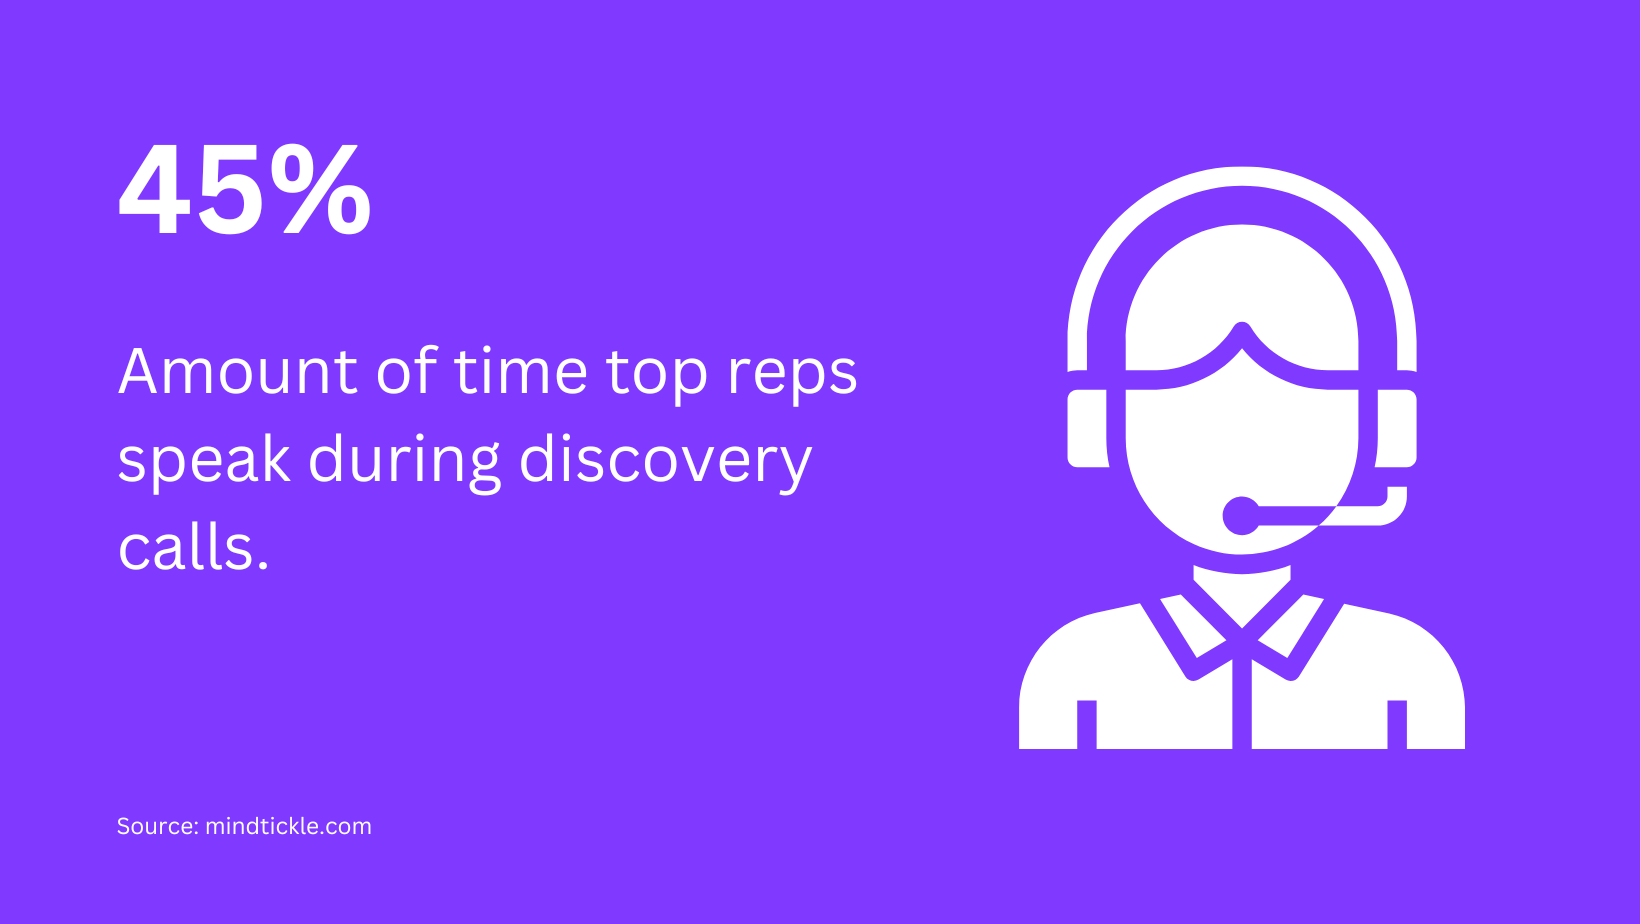 Average amount of time speaking on discovery calls statistic